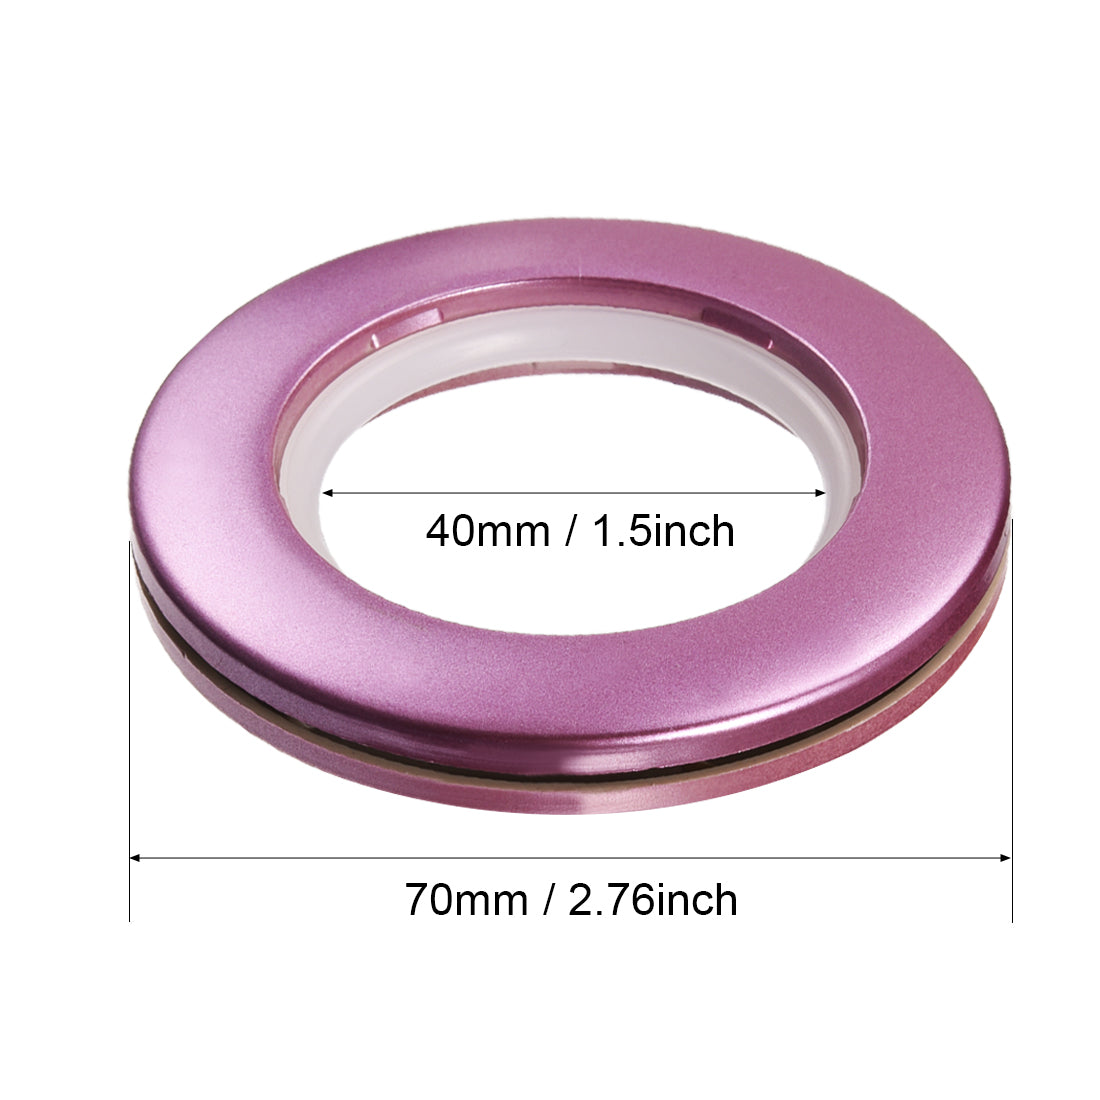 uxcell Uxcell Curtain Grommets Plastic Drapery Eyelet Rings for Window Curtain Rods